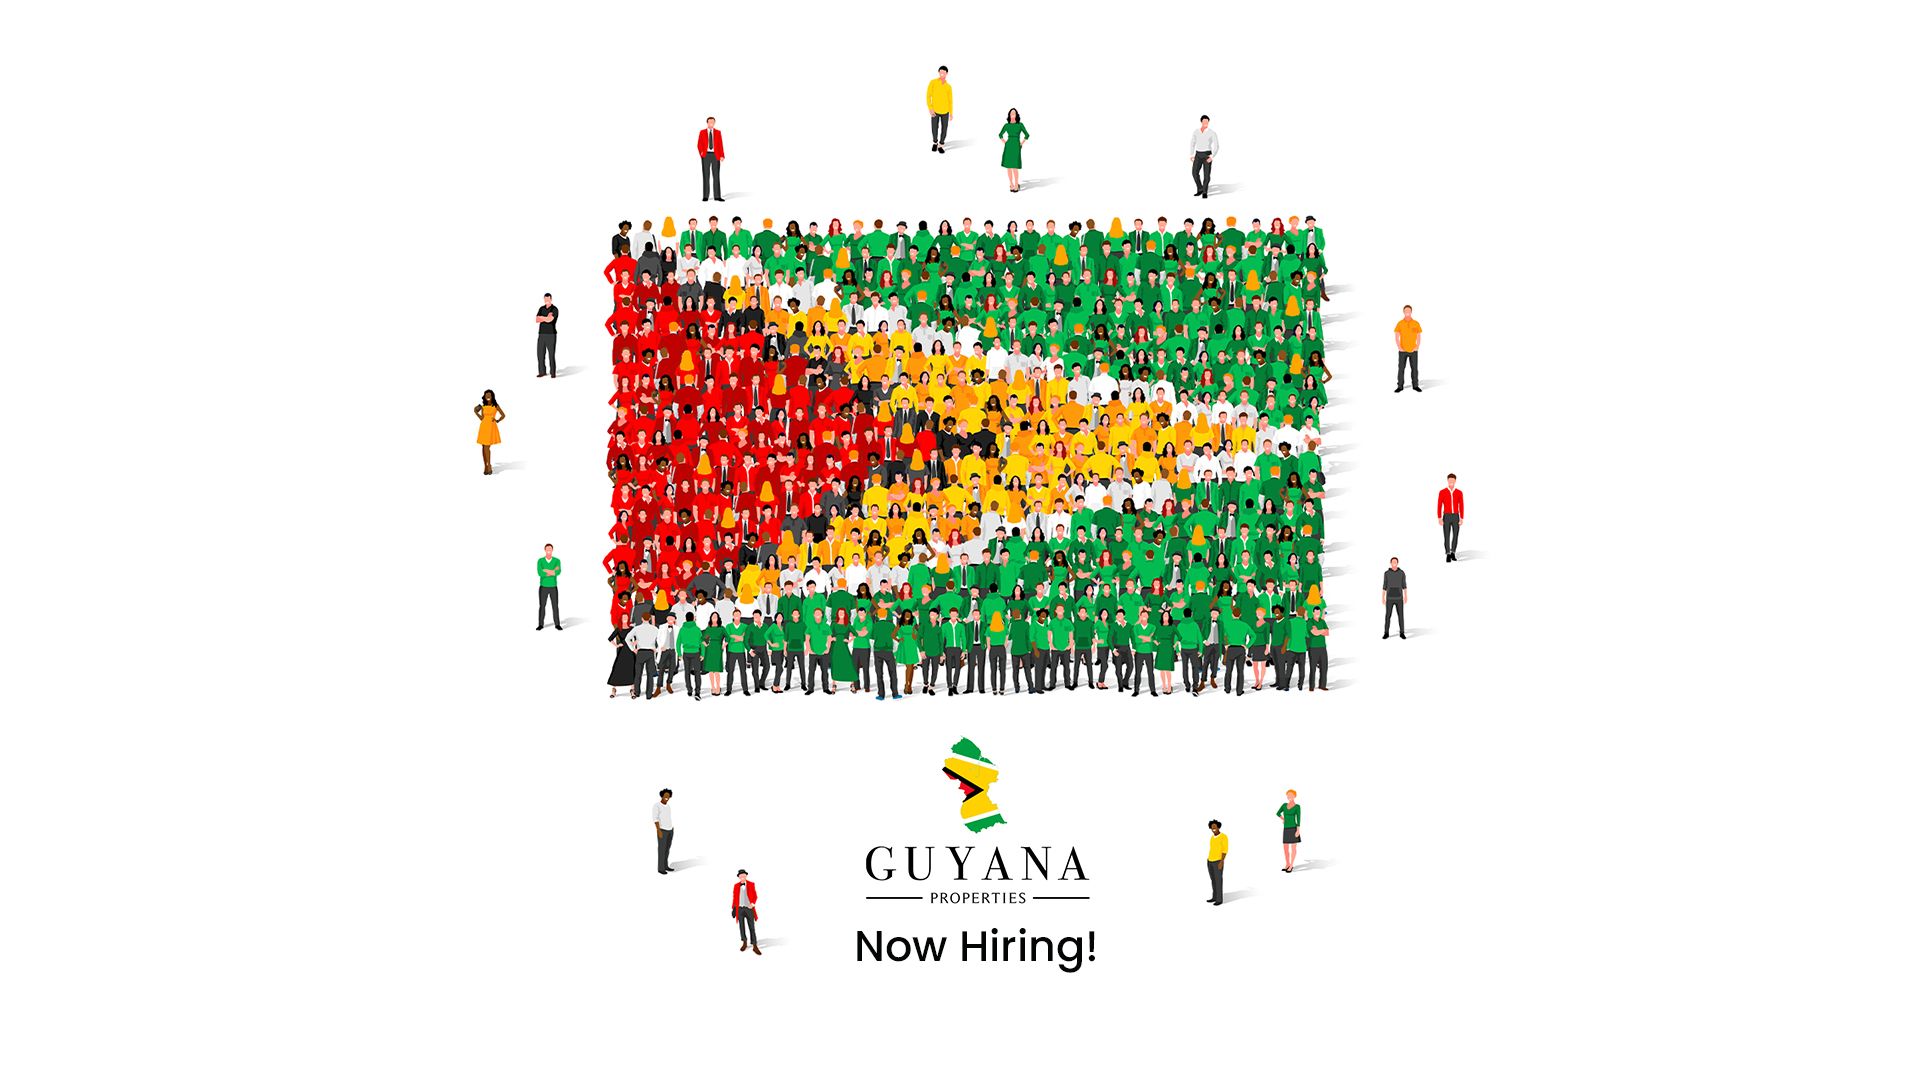 Guyana Properties plans to hire over a hundred local talented Guyanese, to train as GP Professionals!